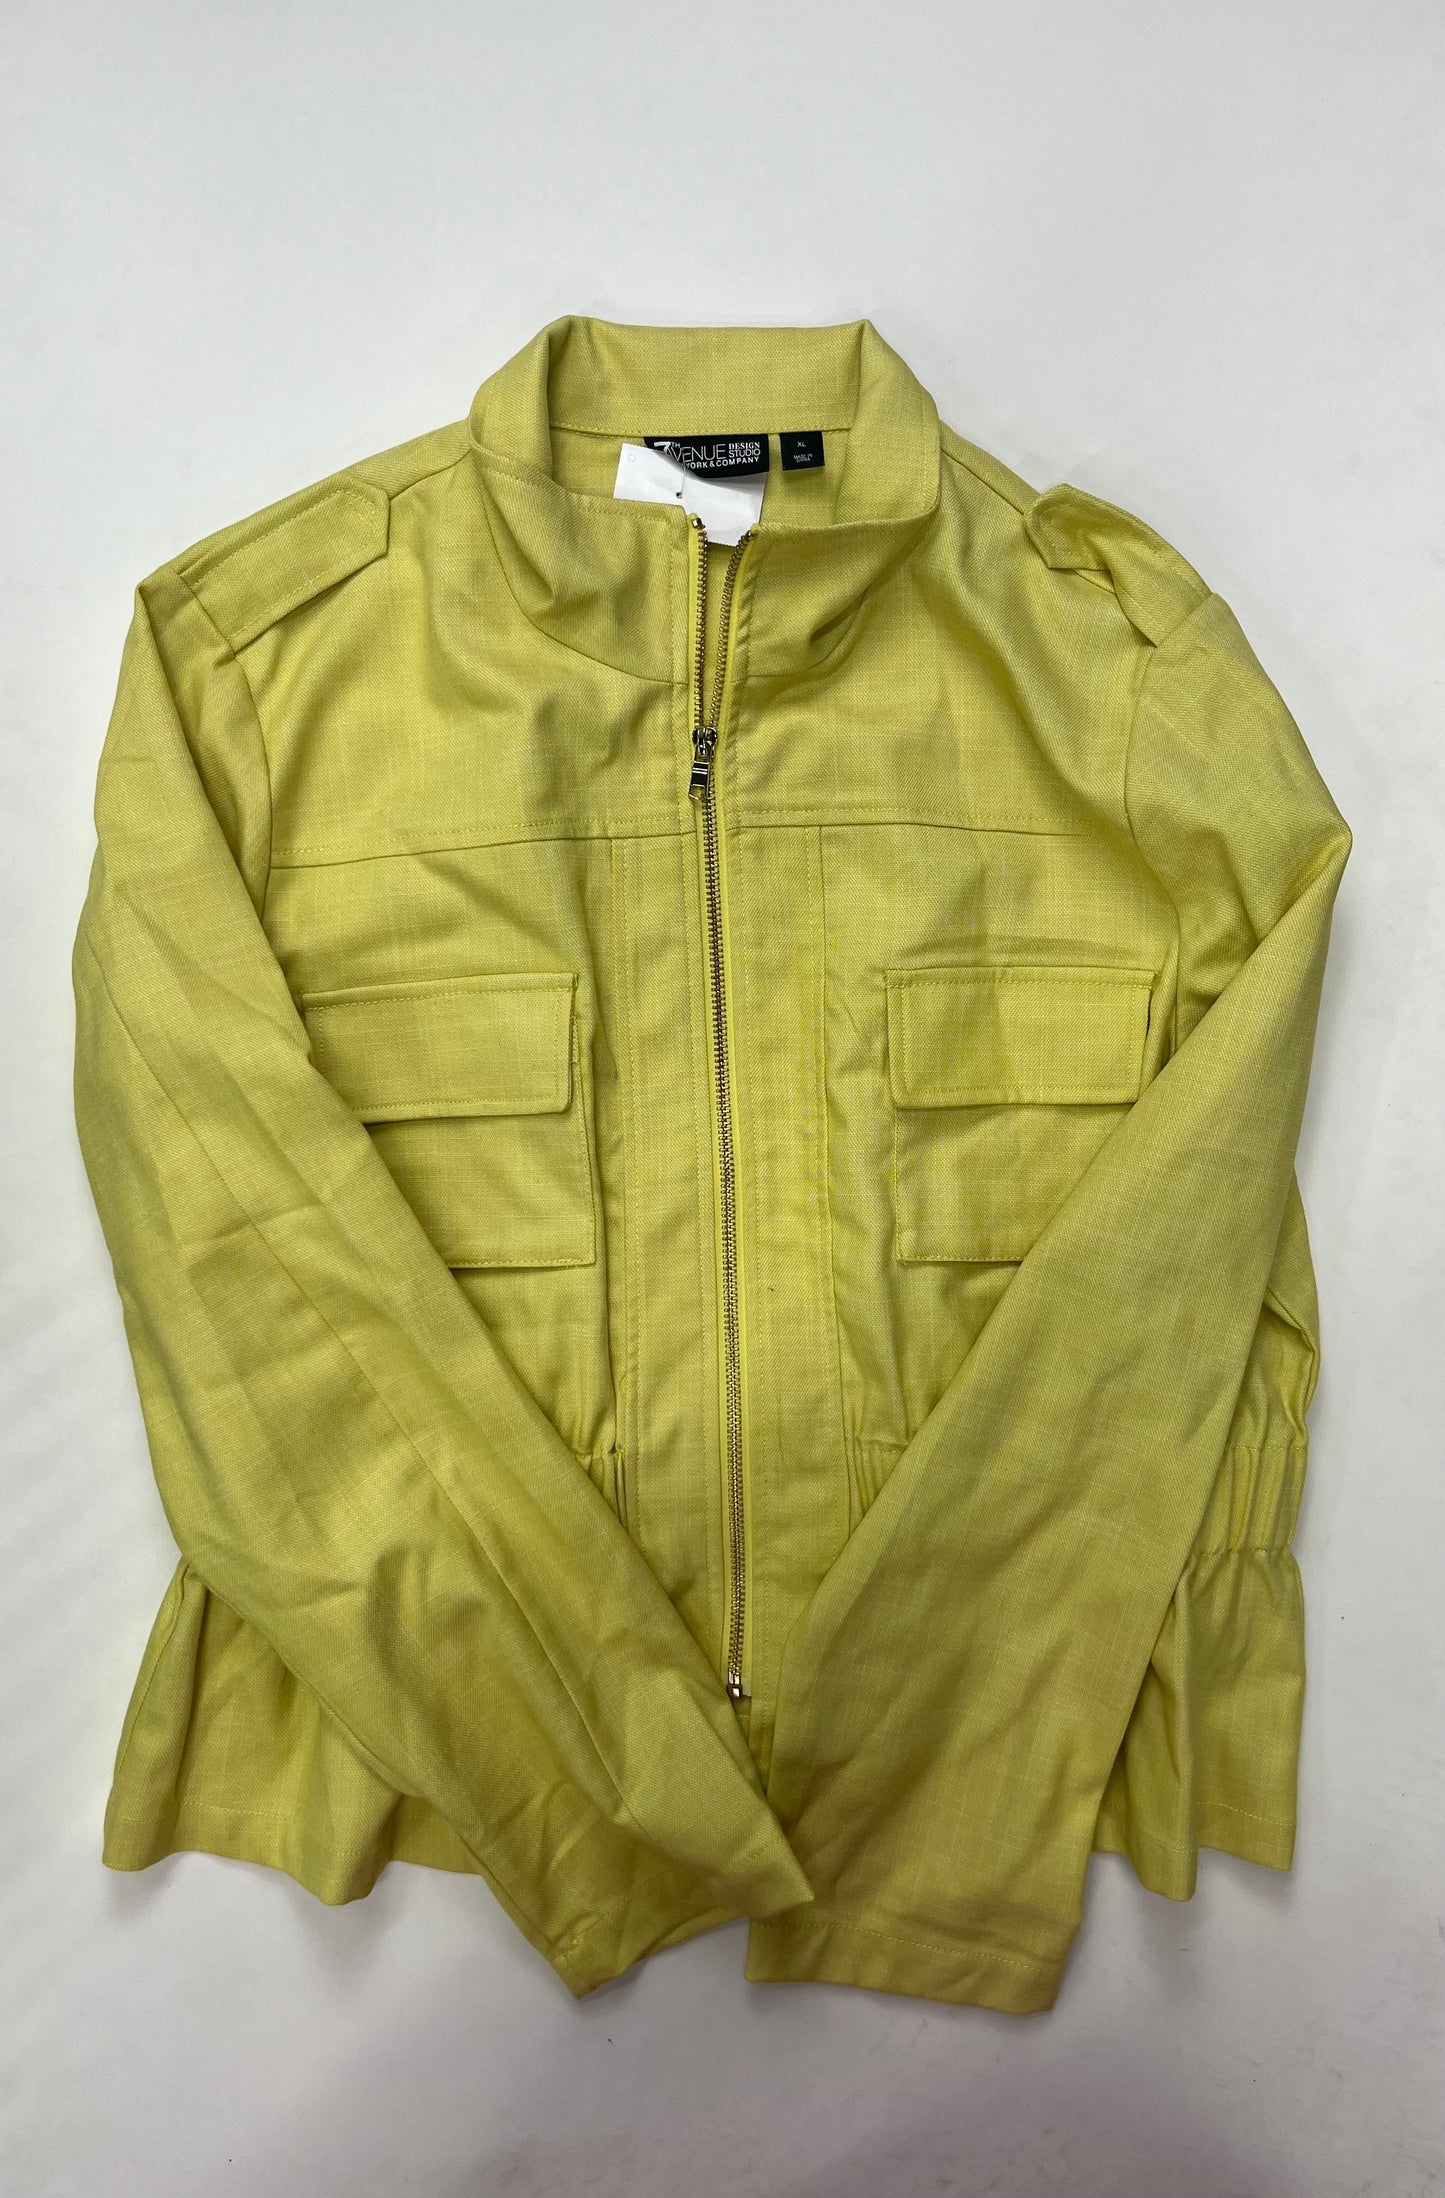 Lime Green Jacket Moto New York And Co, Size Xl